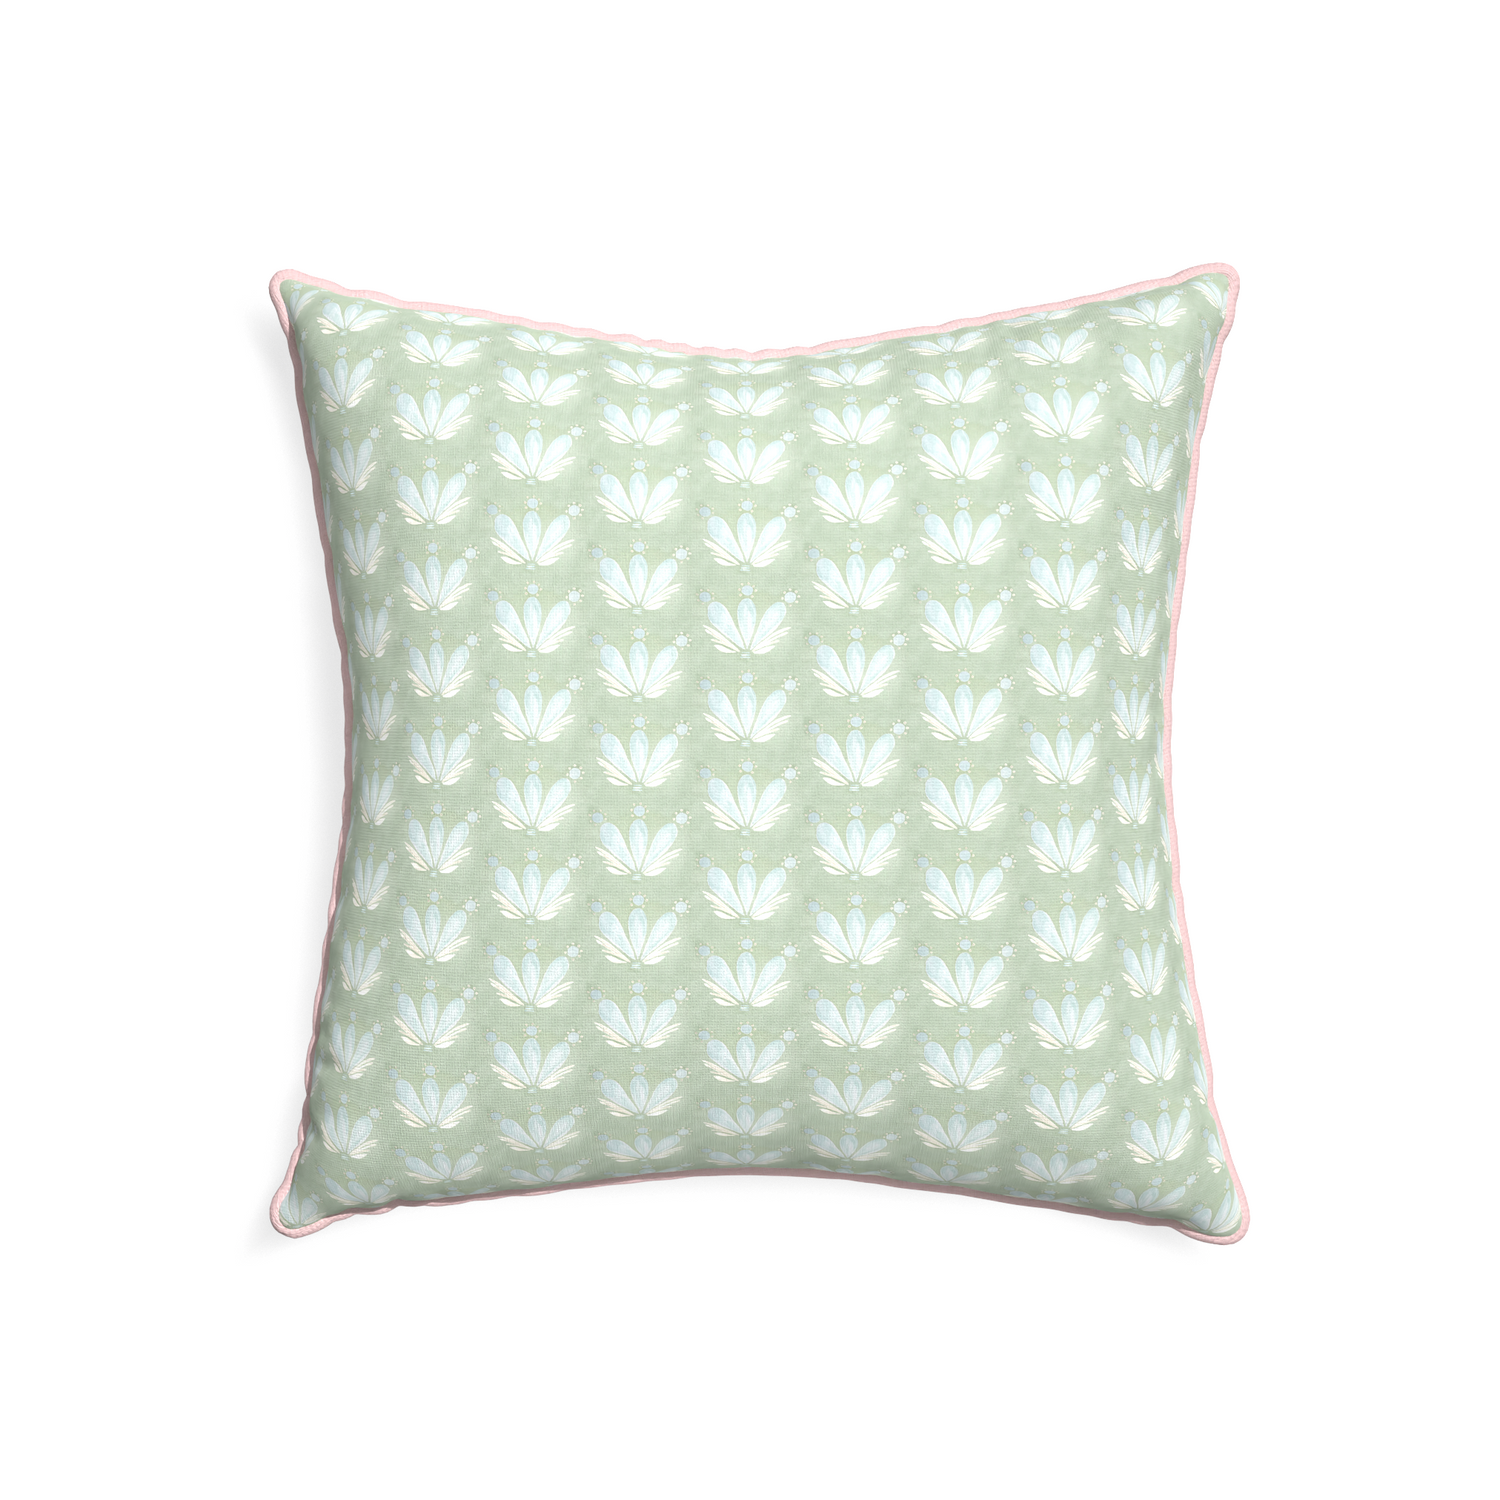 22-square serena sea salt custom blue & green floral drop repeatpillow with petal piping on white background